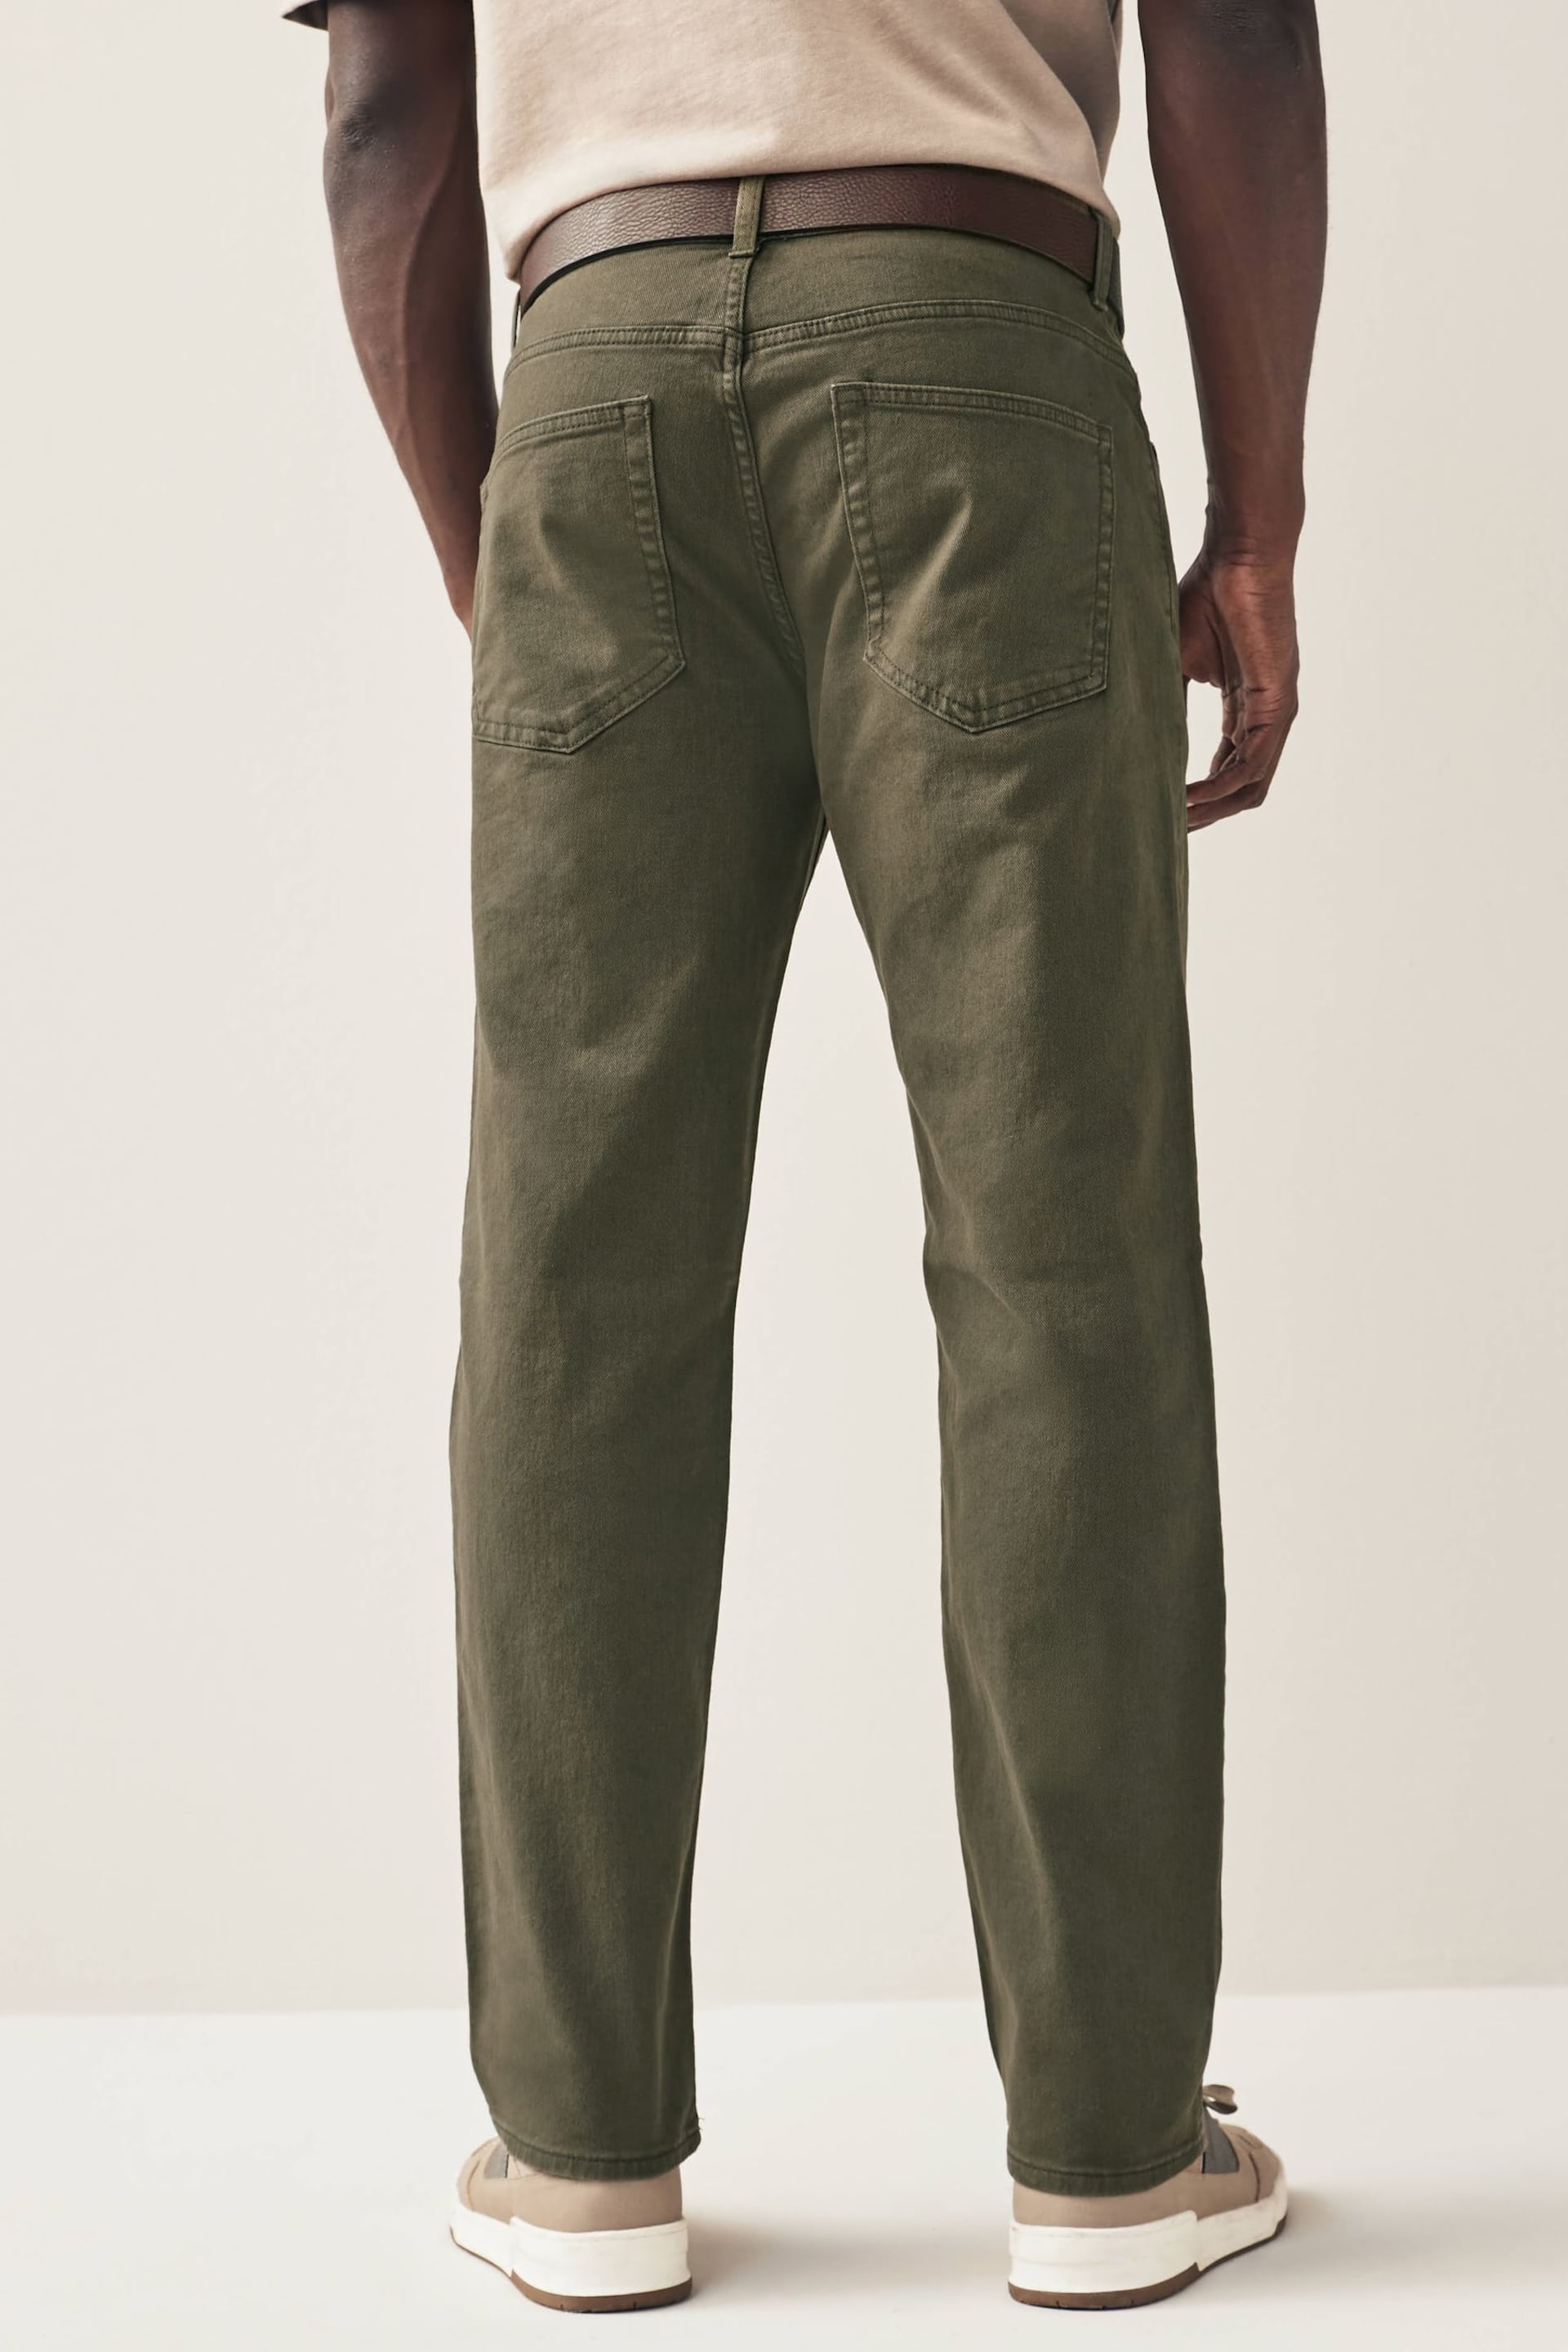 Khaki Green Straight Belted Authentic Jeans - Image 3 of 10